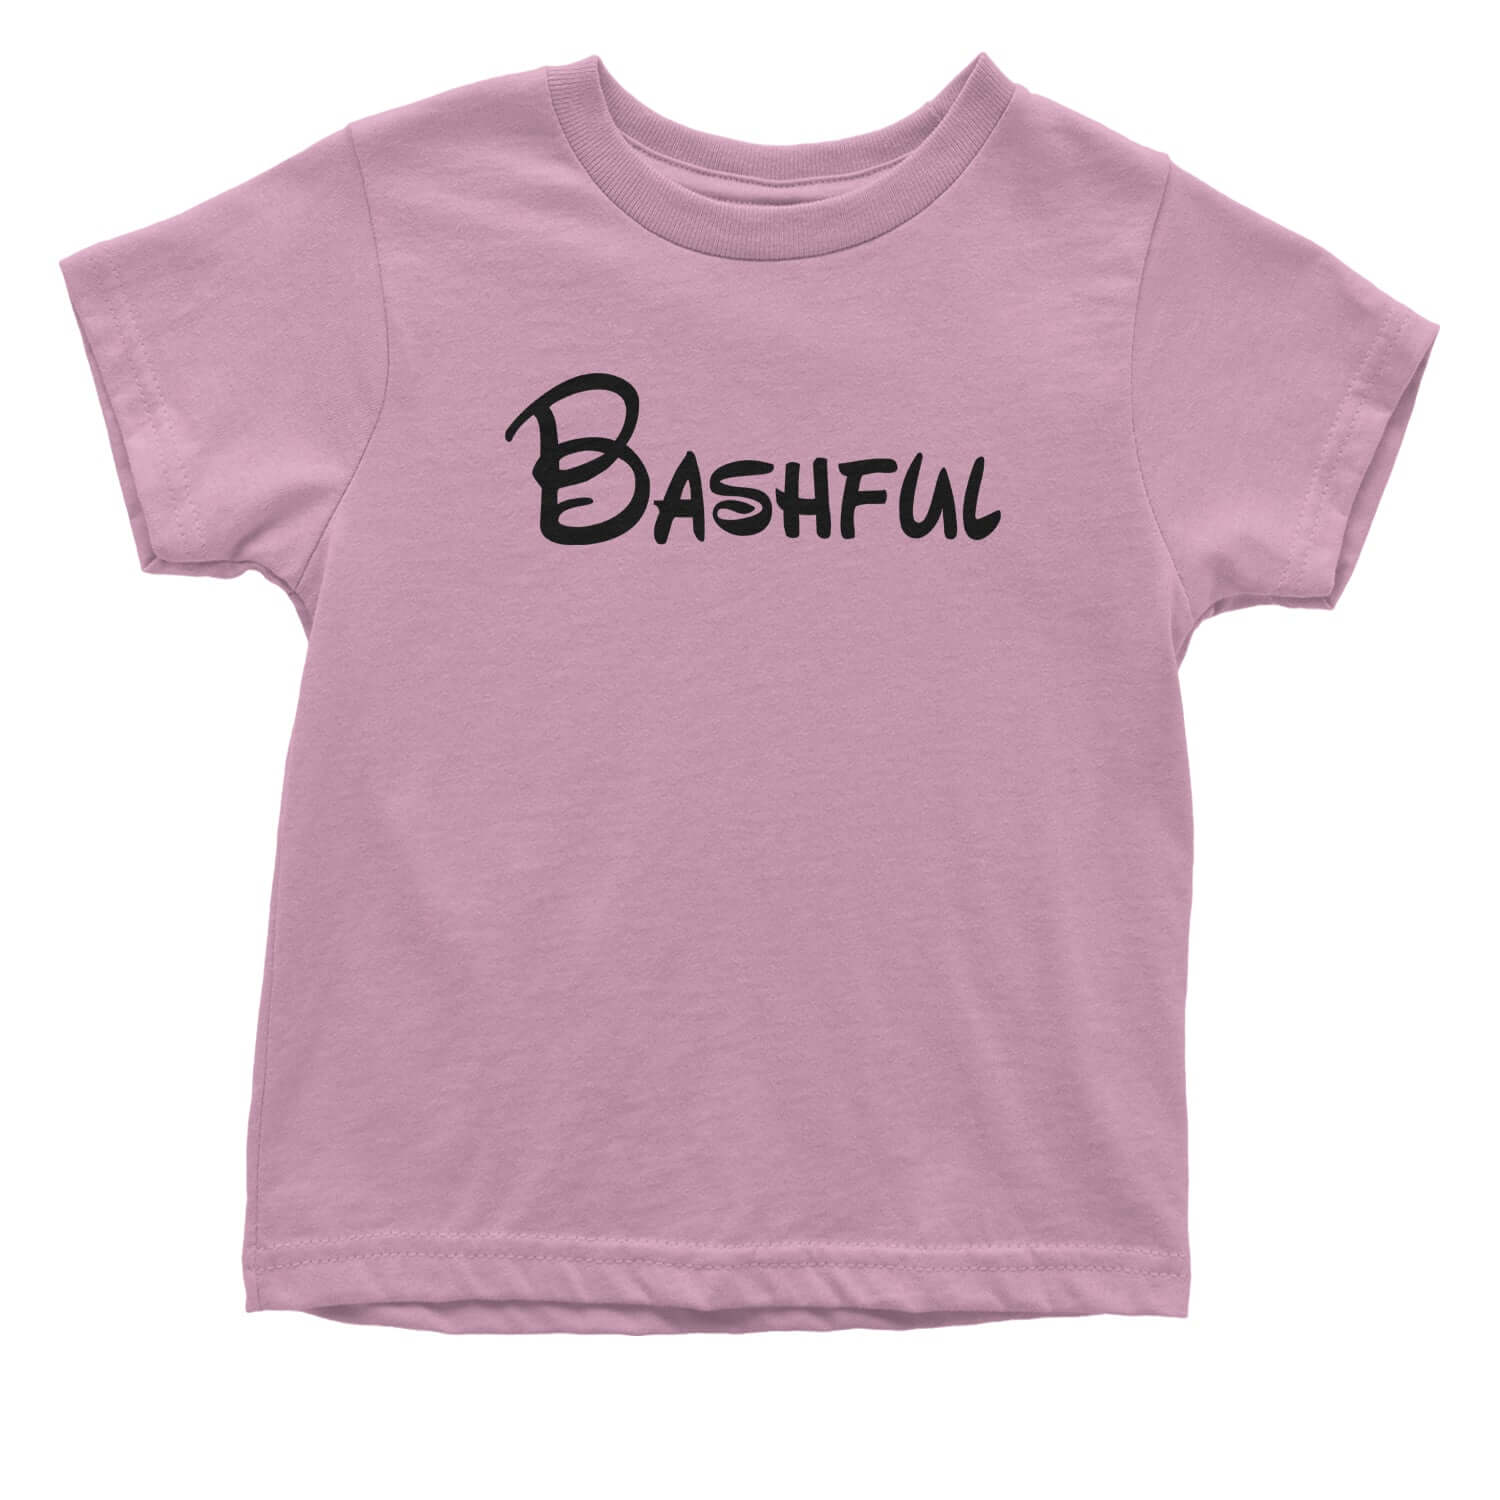 Bashful - 7 Dwarfs Costume Toddler T-Shirt and, costume, dwarfs, group, halloween, matching, seven, snow, the, white by Expression Tees